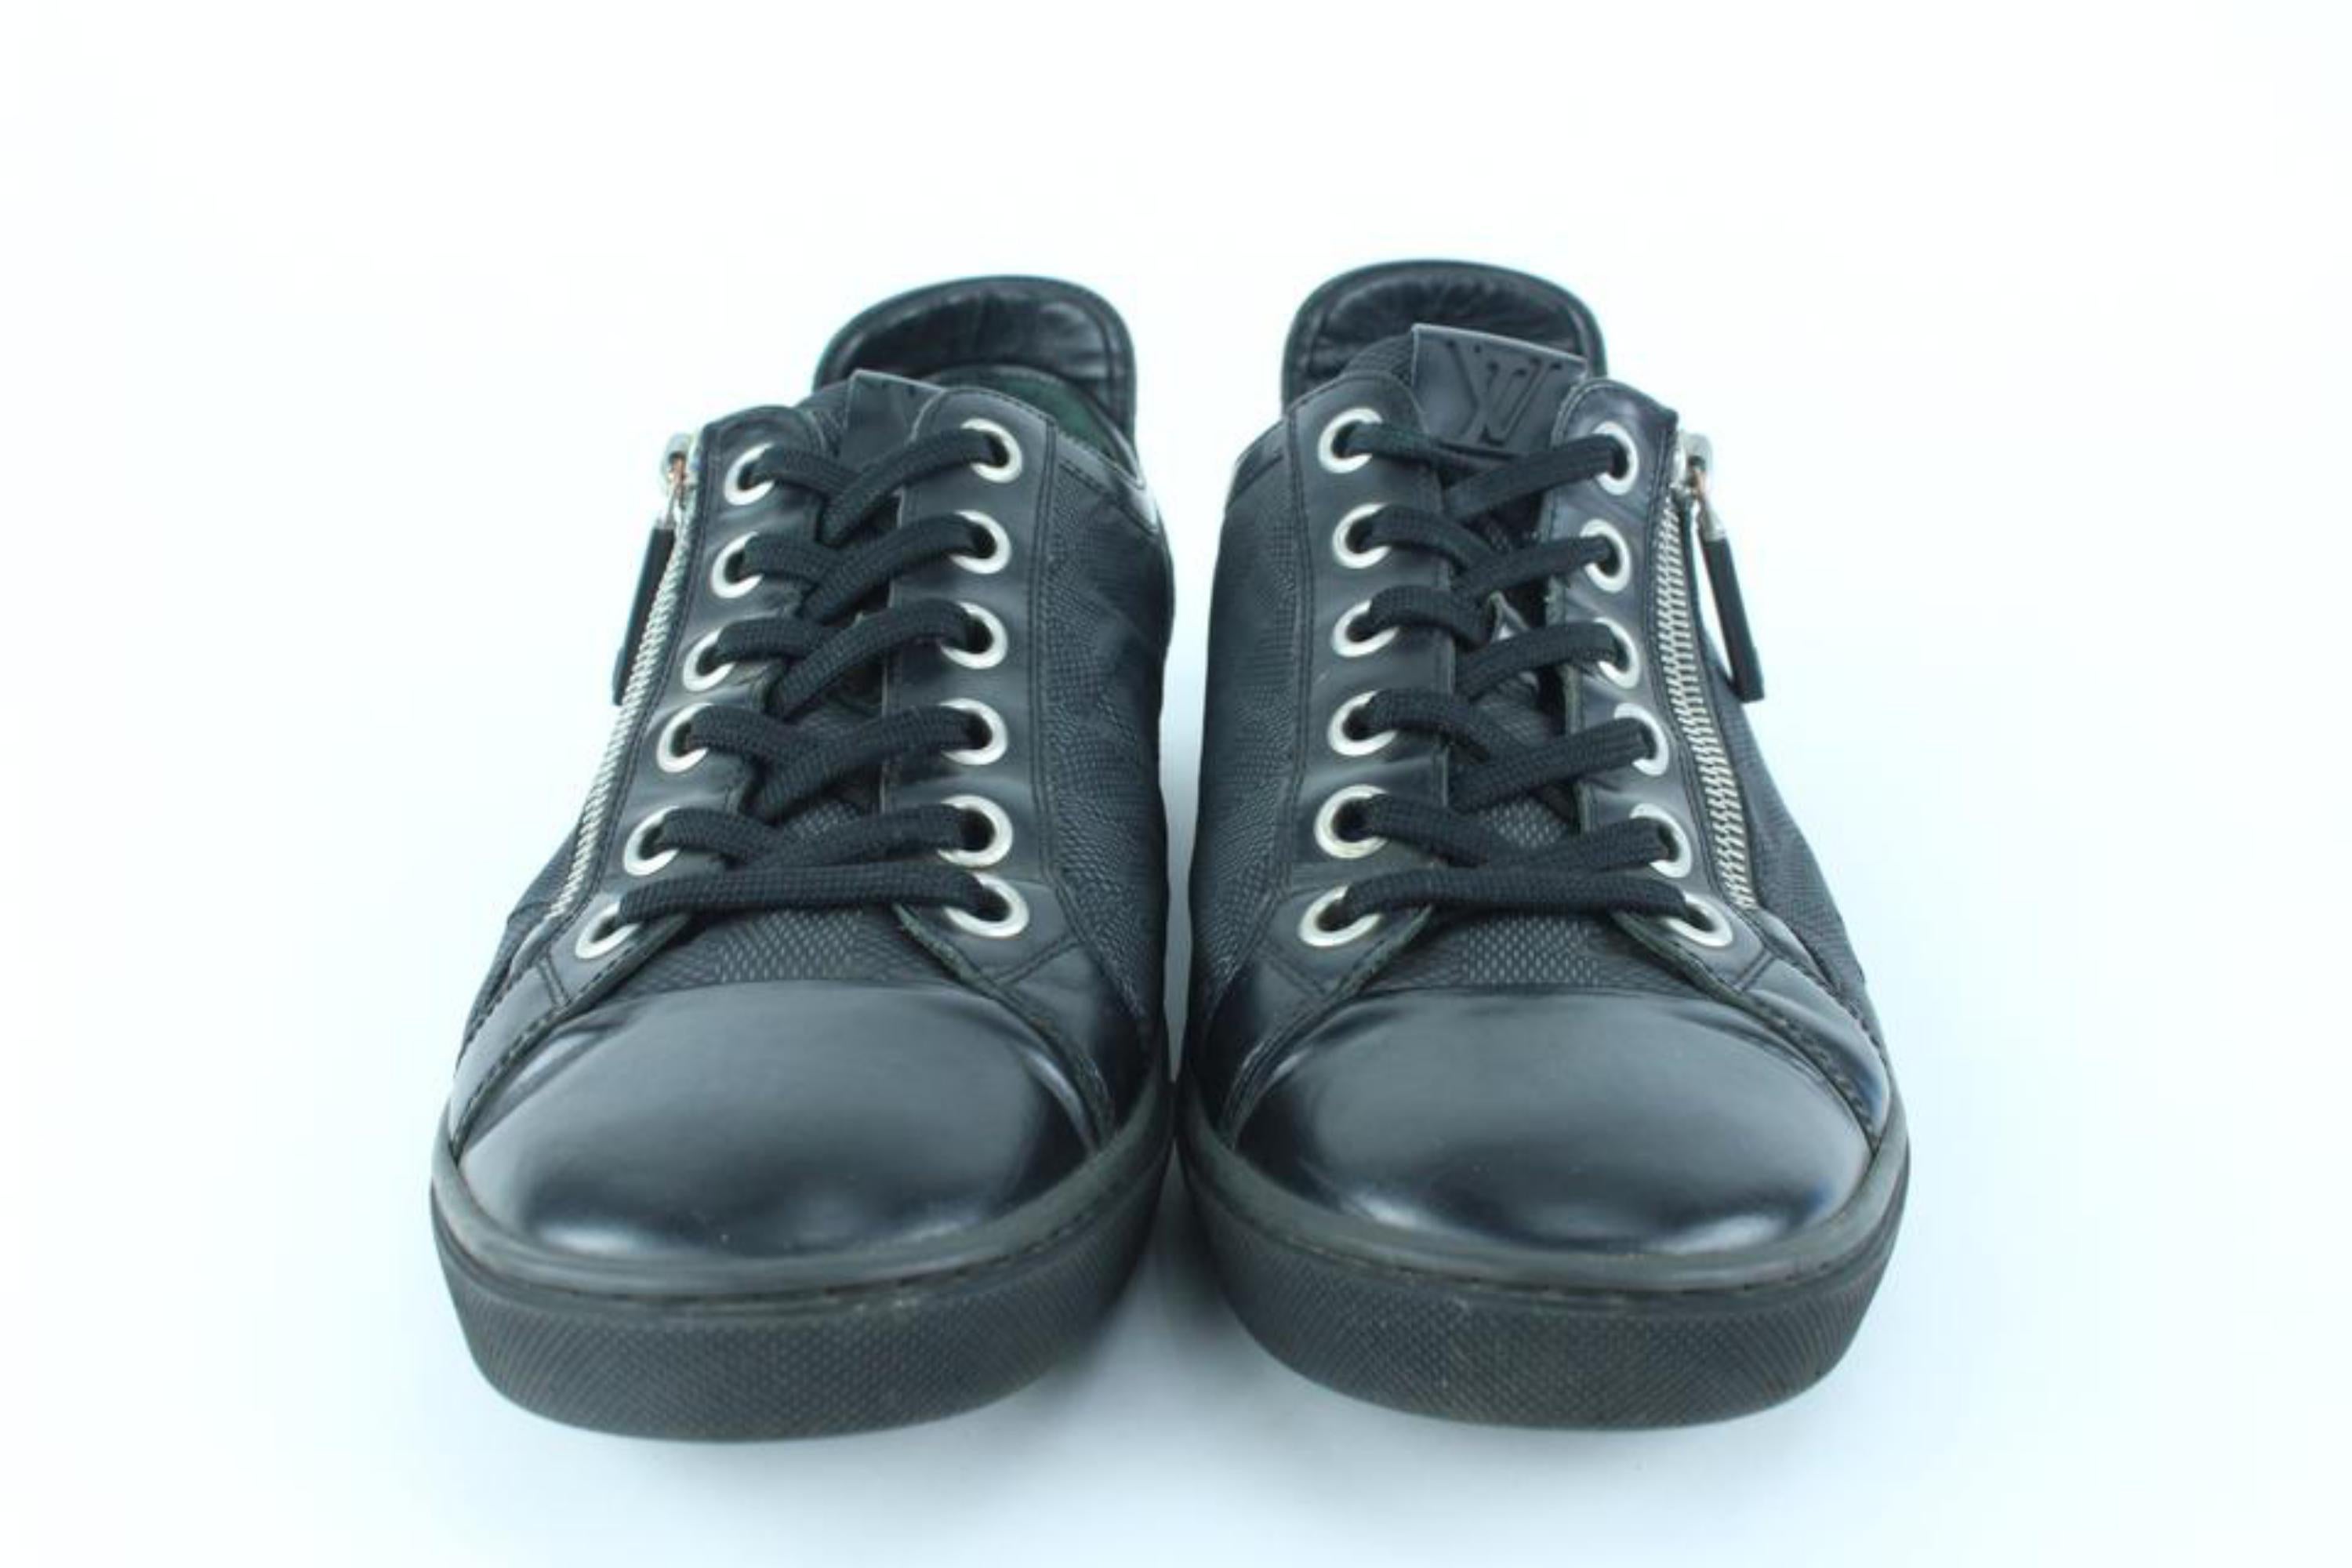 Louis Vuitton Men's 7 US Damier Graphite Nylon Punchy Low Top Sneaker 112lv27 In Good Condition For Sale In Dix hills, NY